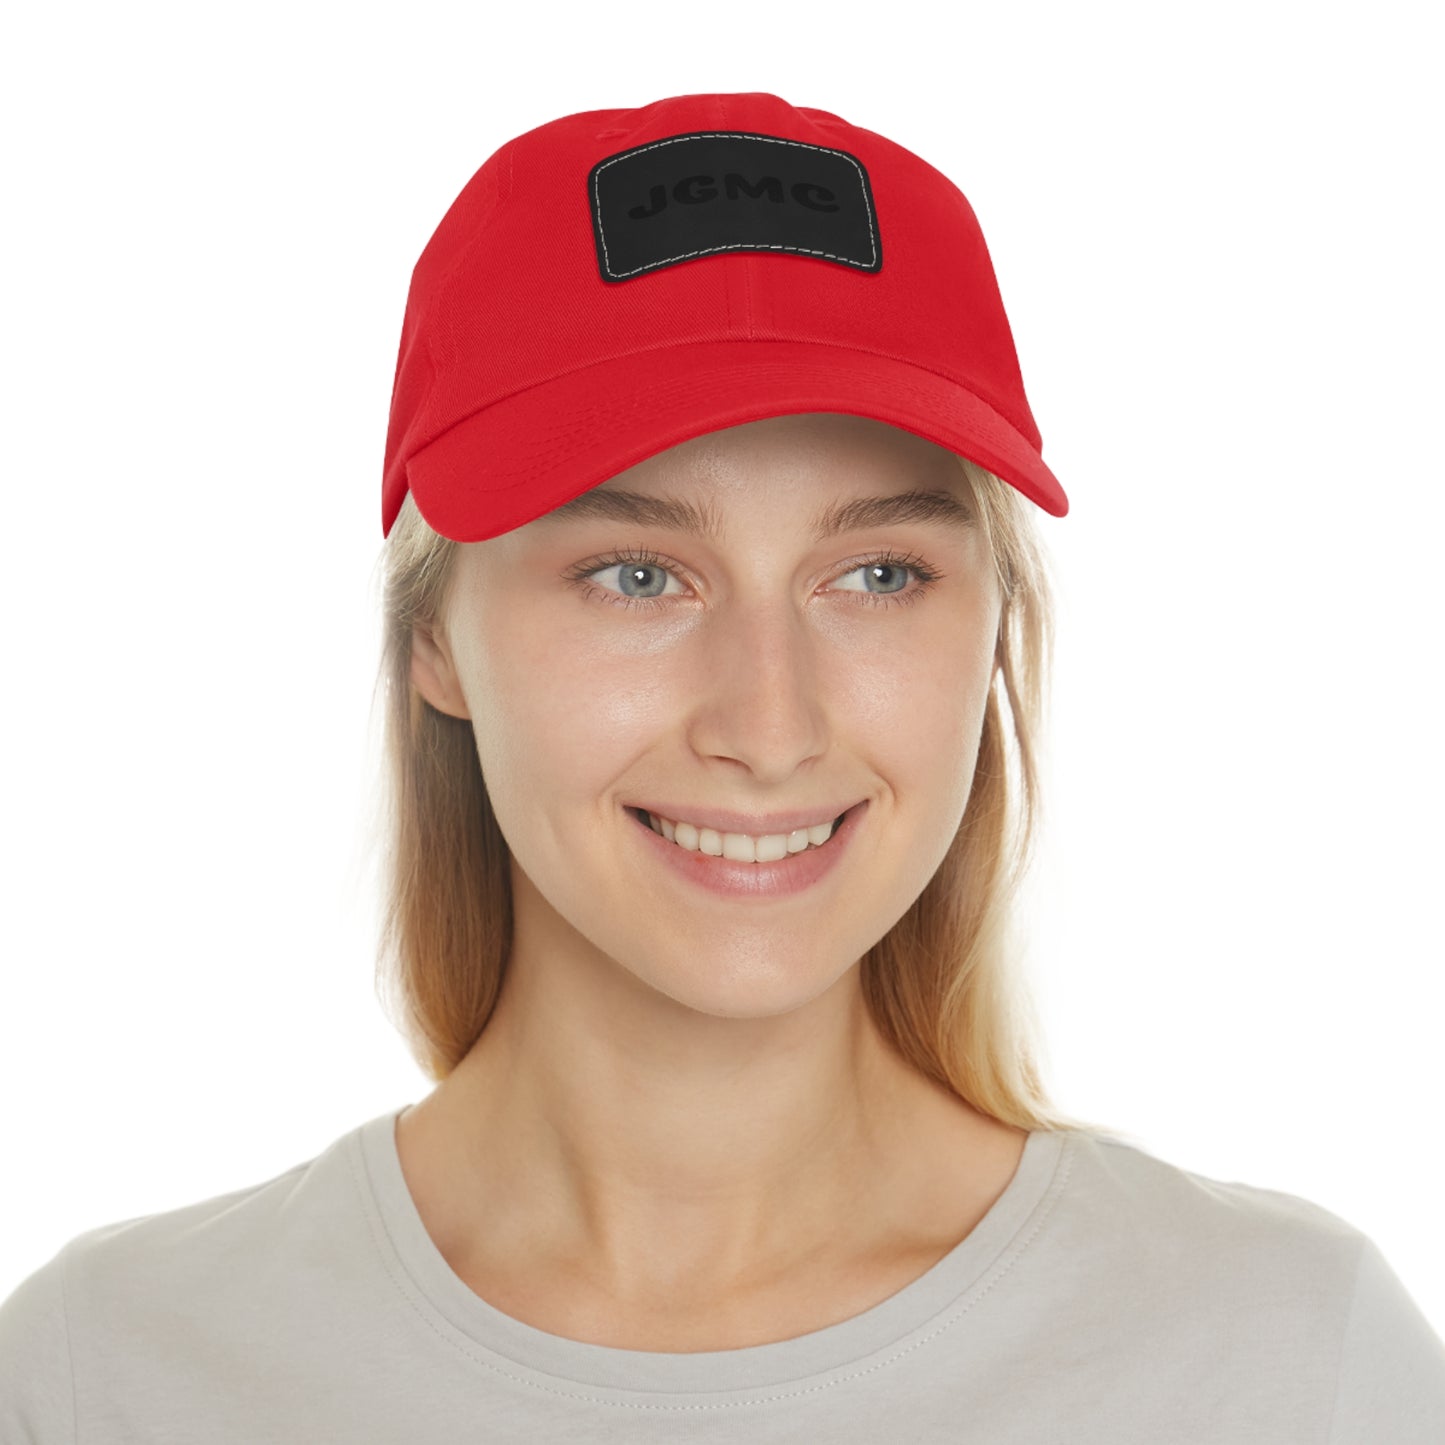 JGMC Dad Hat with Leather Patch (Rectangle)